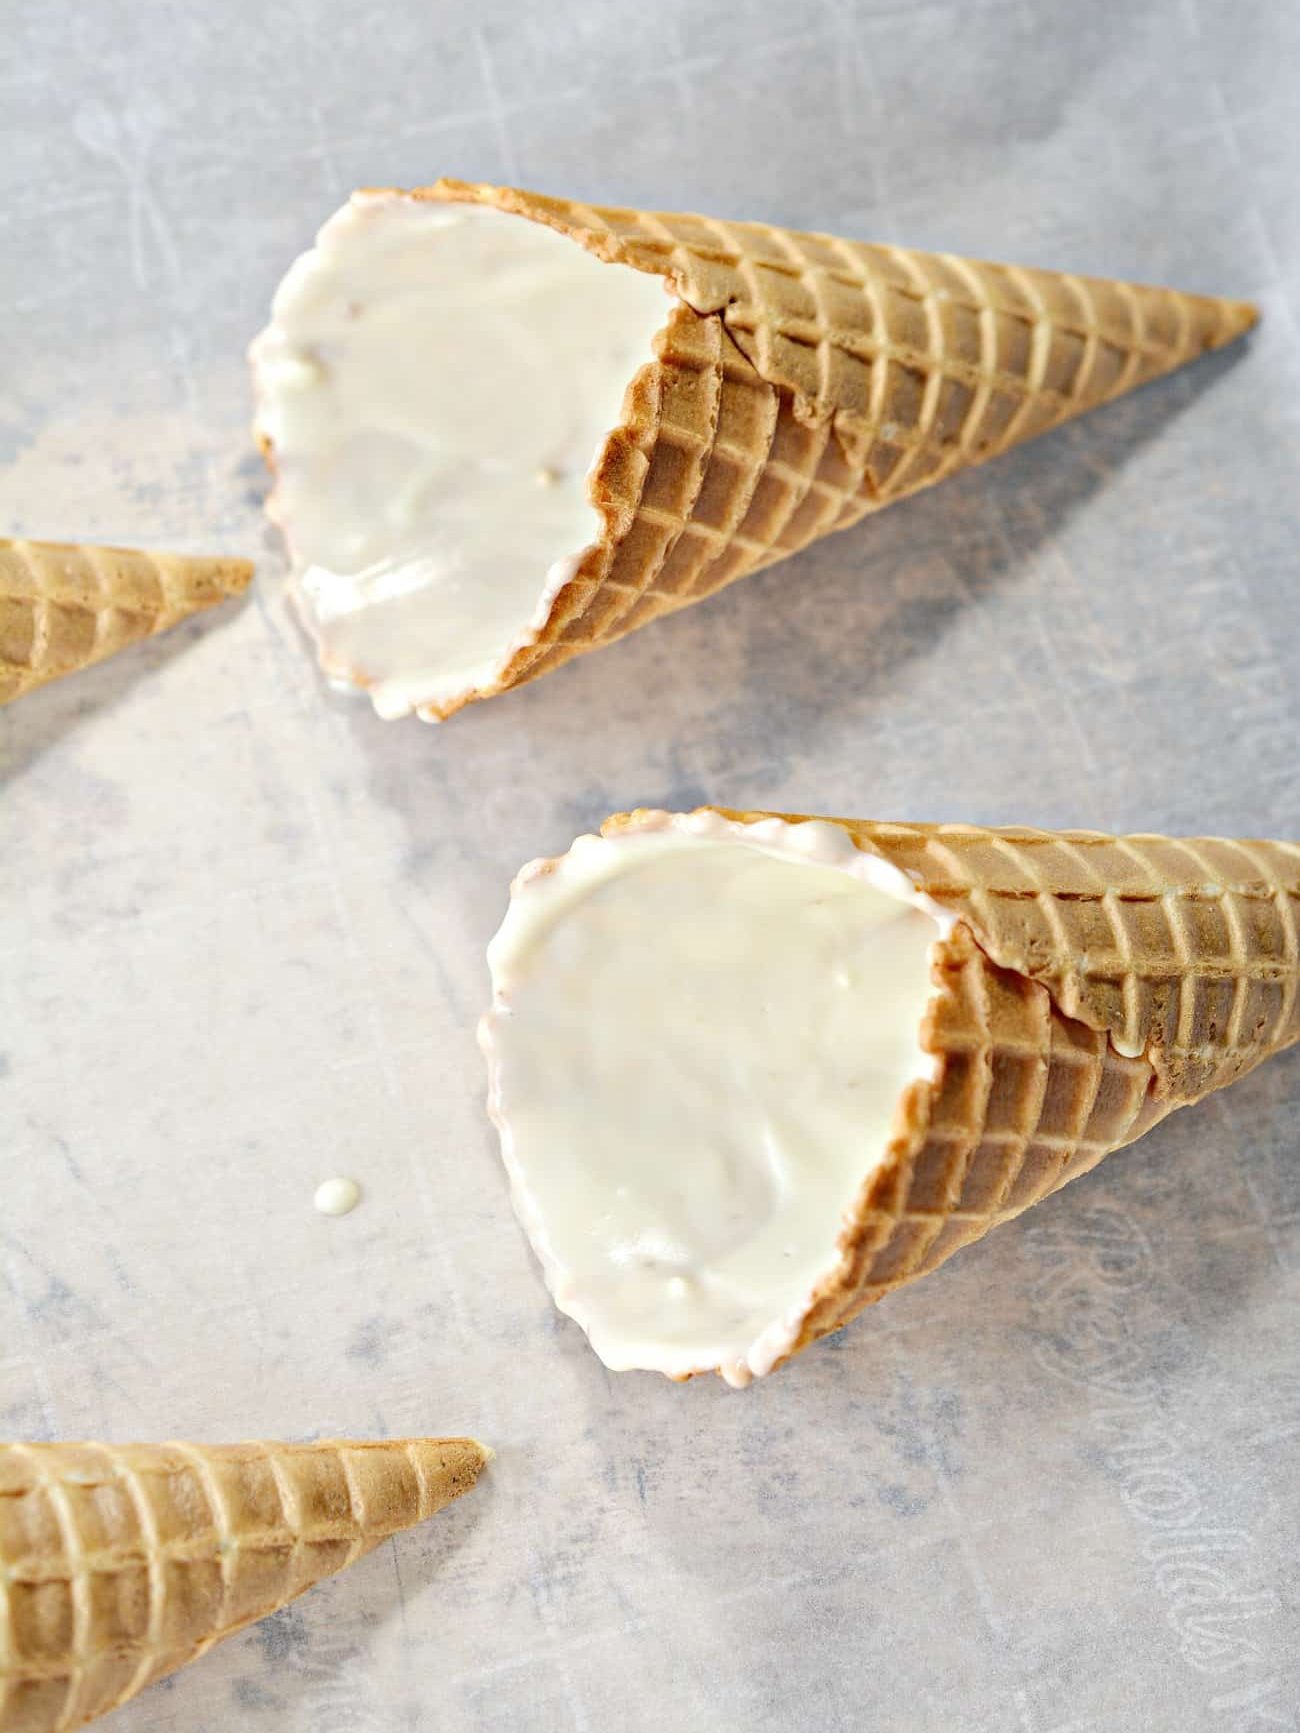 Coat the inside of each waffle cone with the white chocolate, and place on a parchment or silicone mat-lined baking sheet to set.